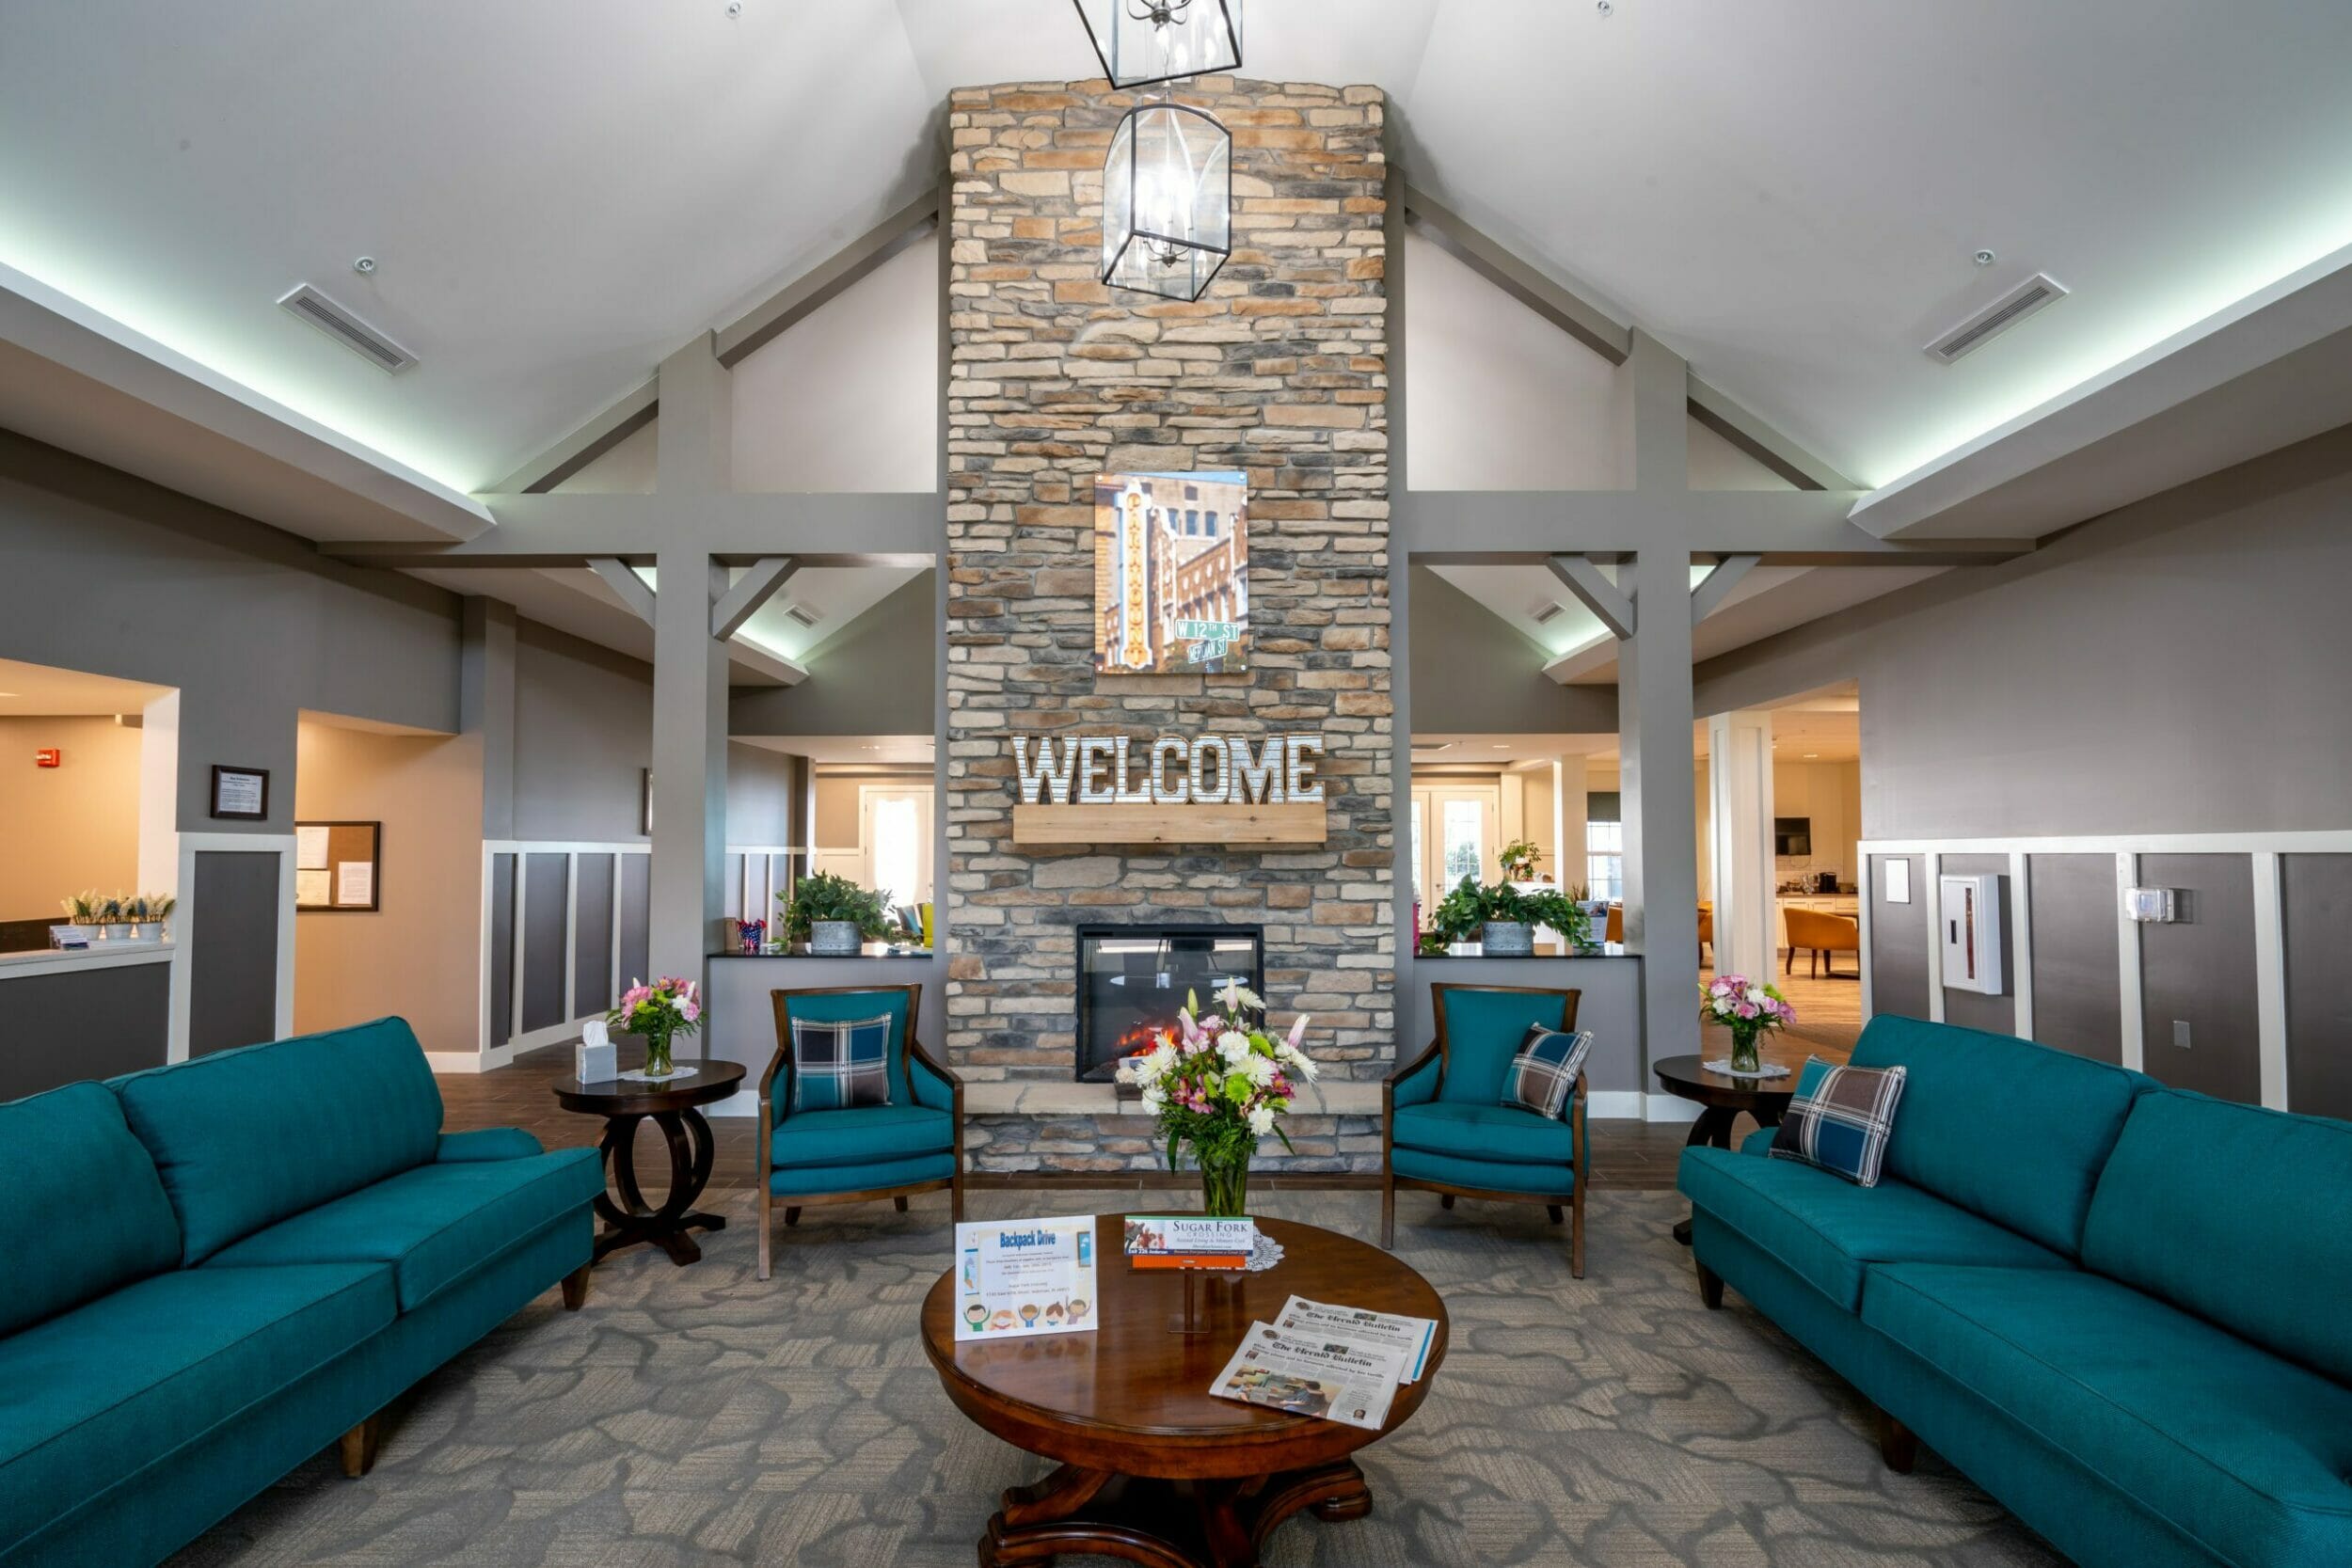 Lounge area of Sugar Fork Crossing senior living with a tall, stone fireplace, gray-colored walls, and teal furniture